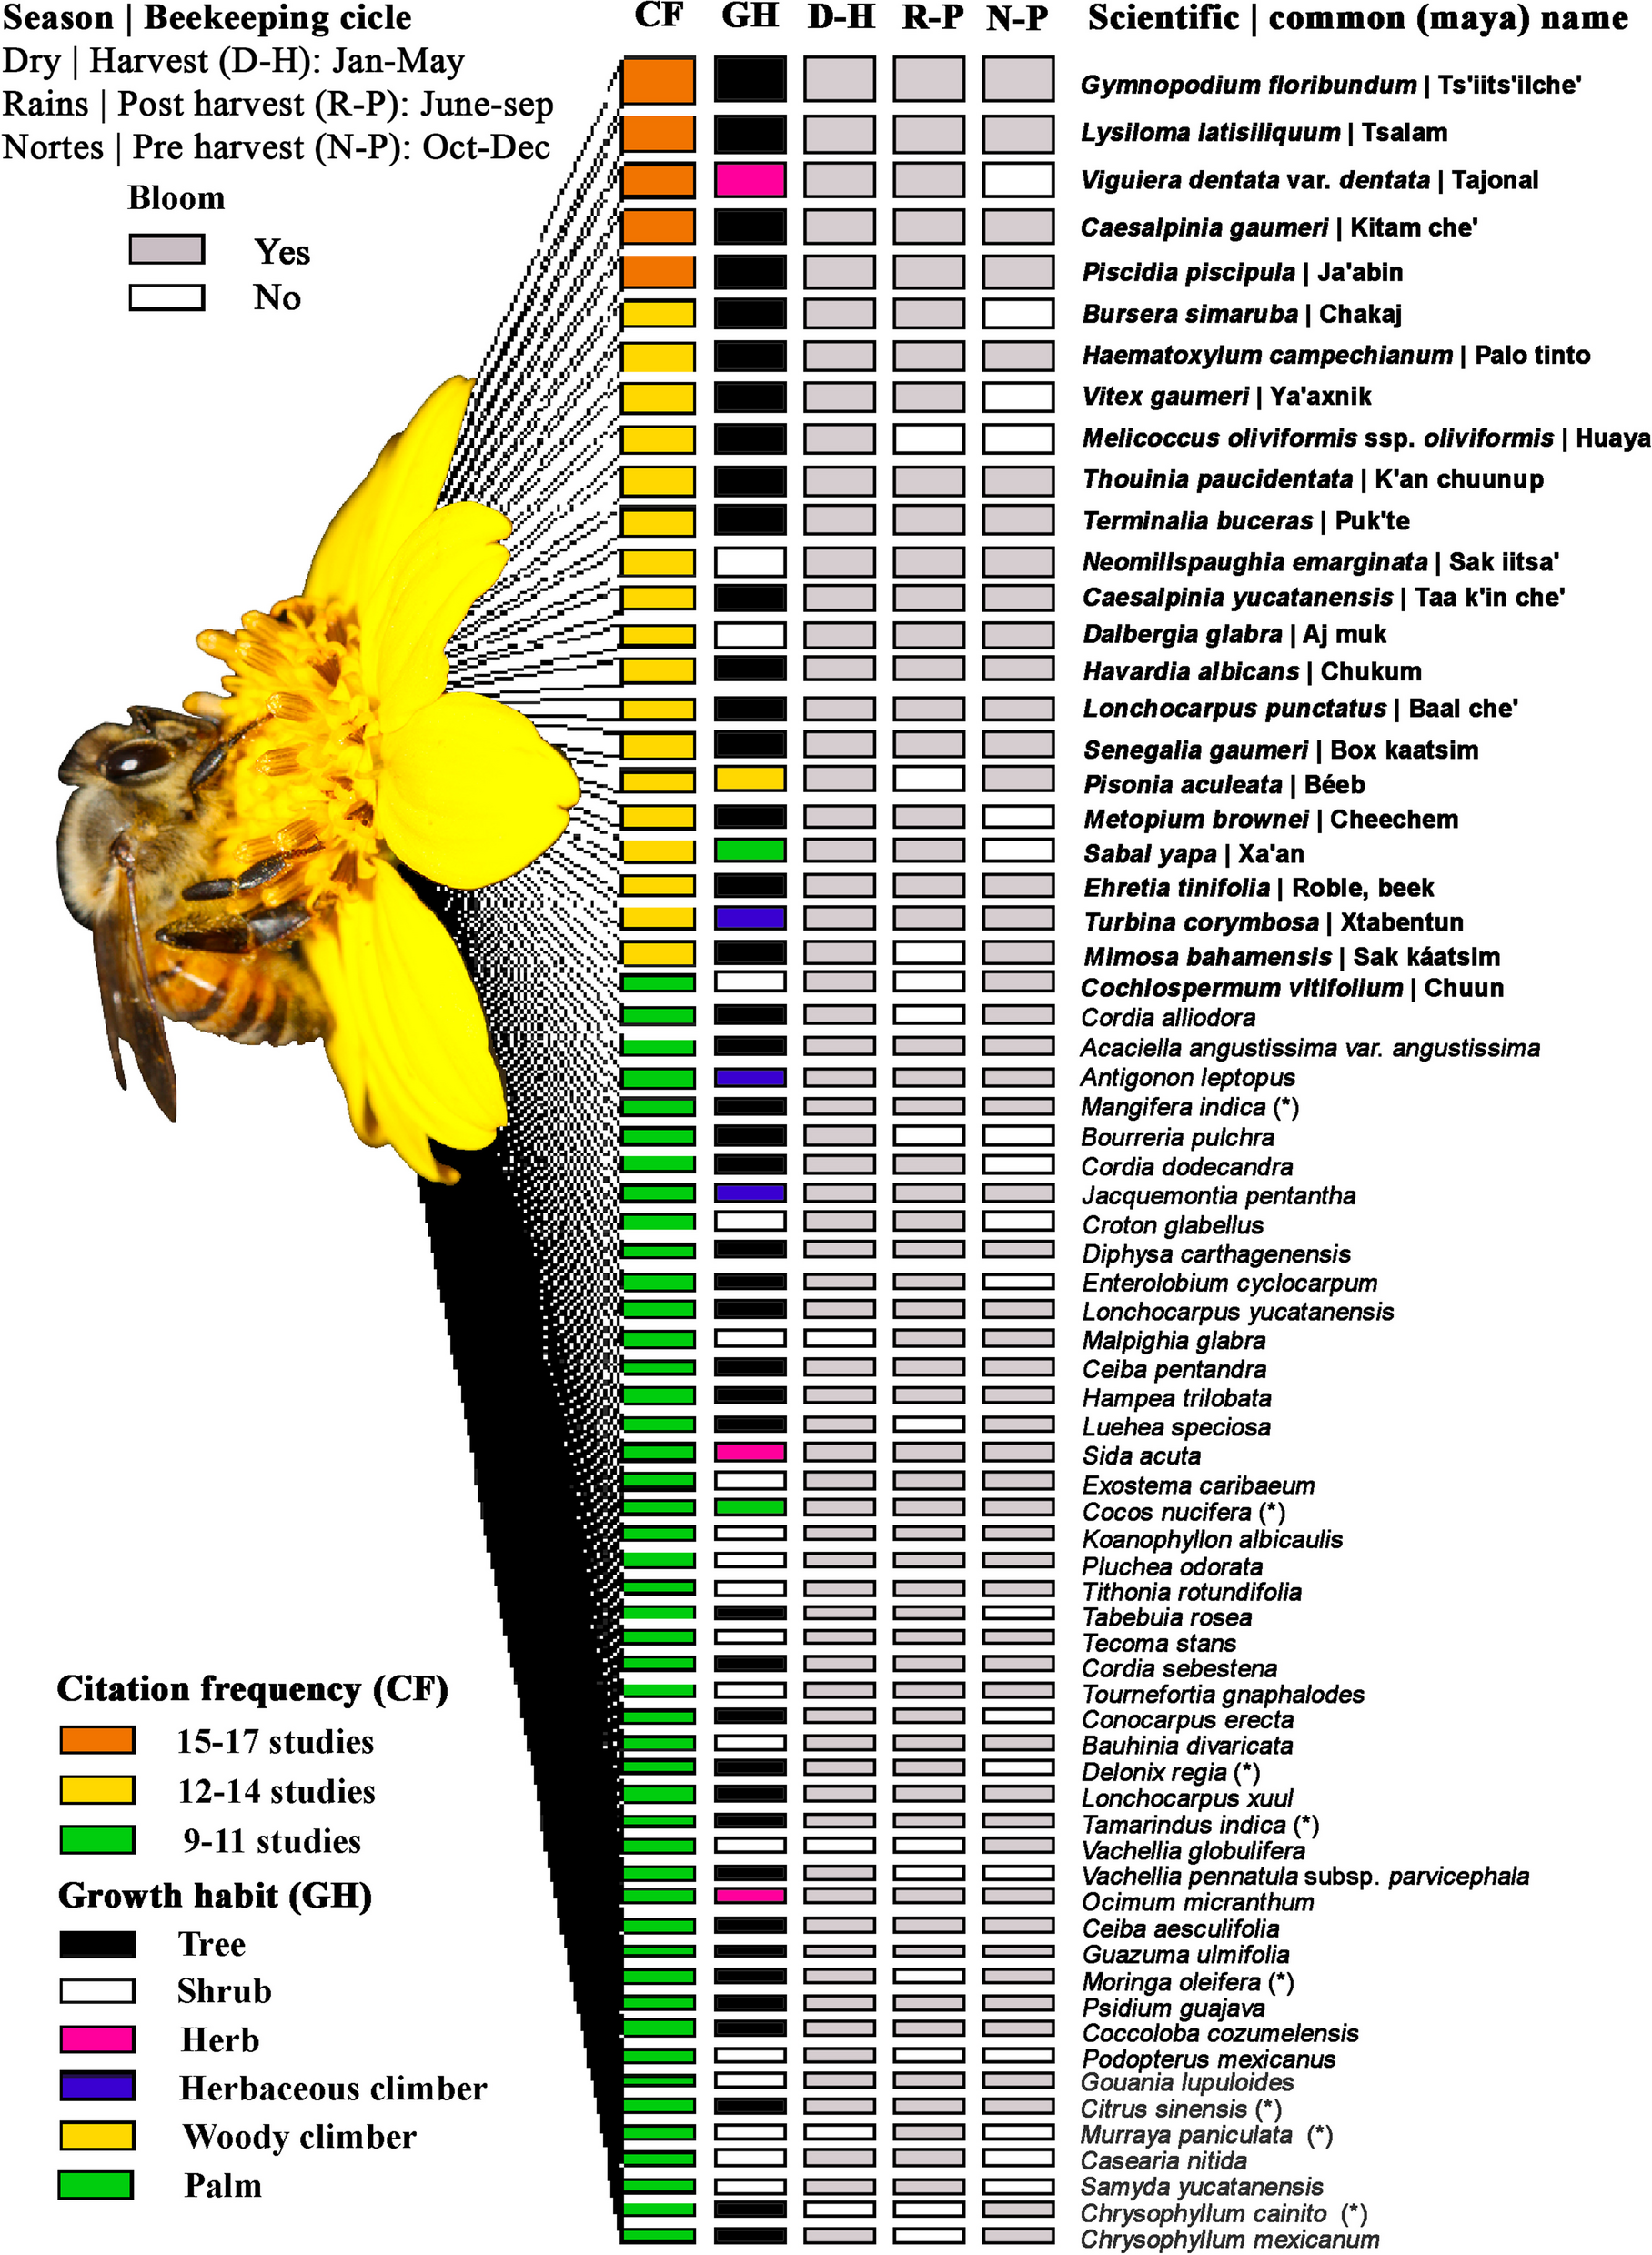 A review of the melliferous flora of Yucatan peninsula, Mexico, on the basis for the honey production cycle